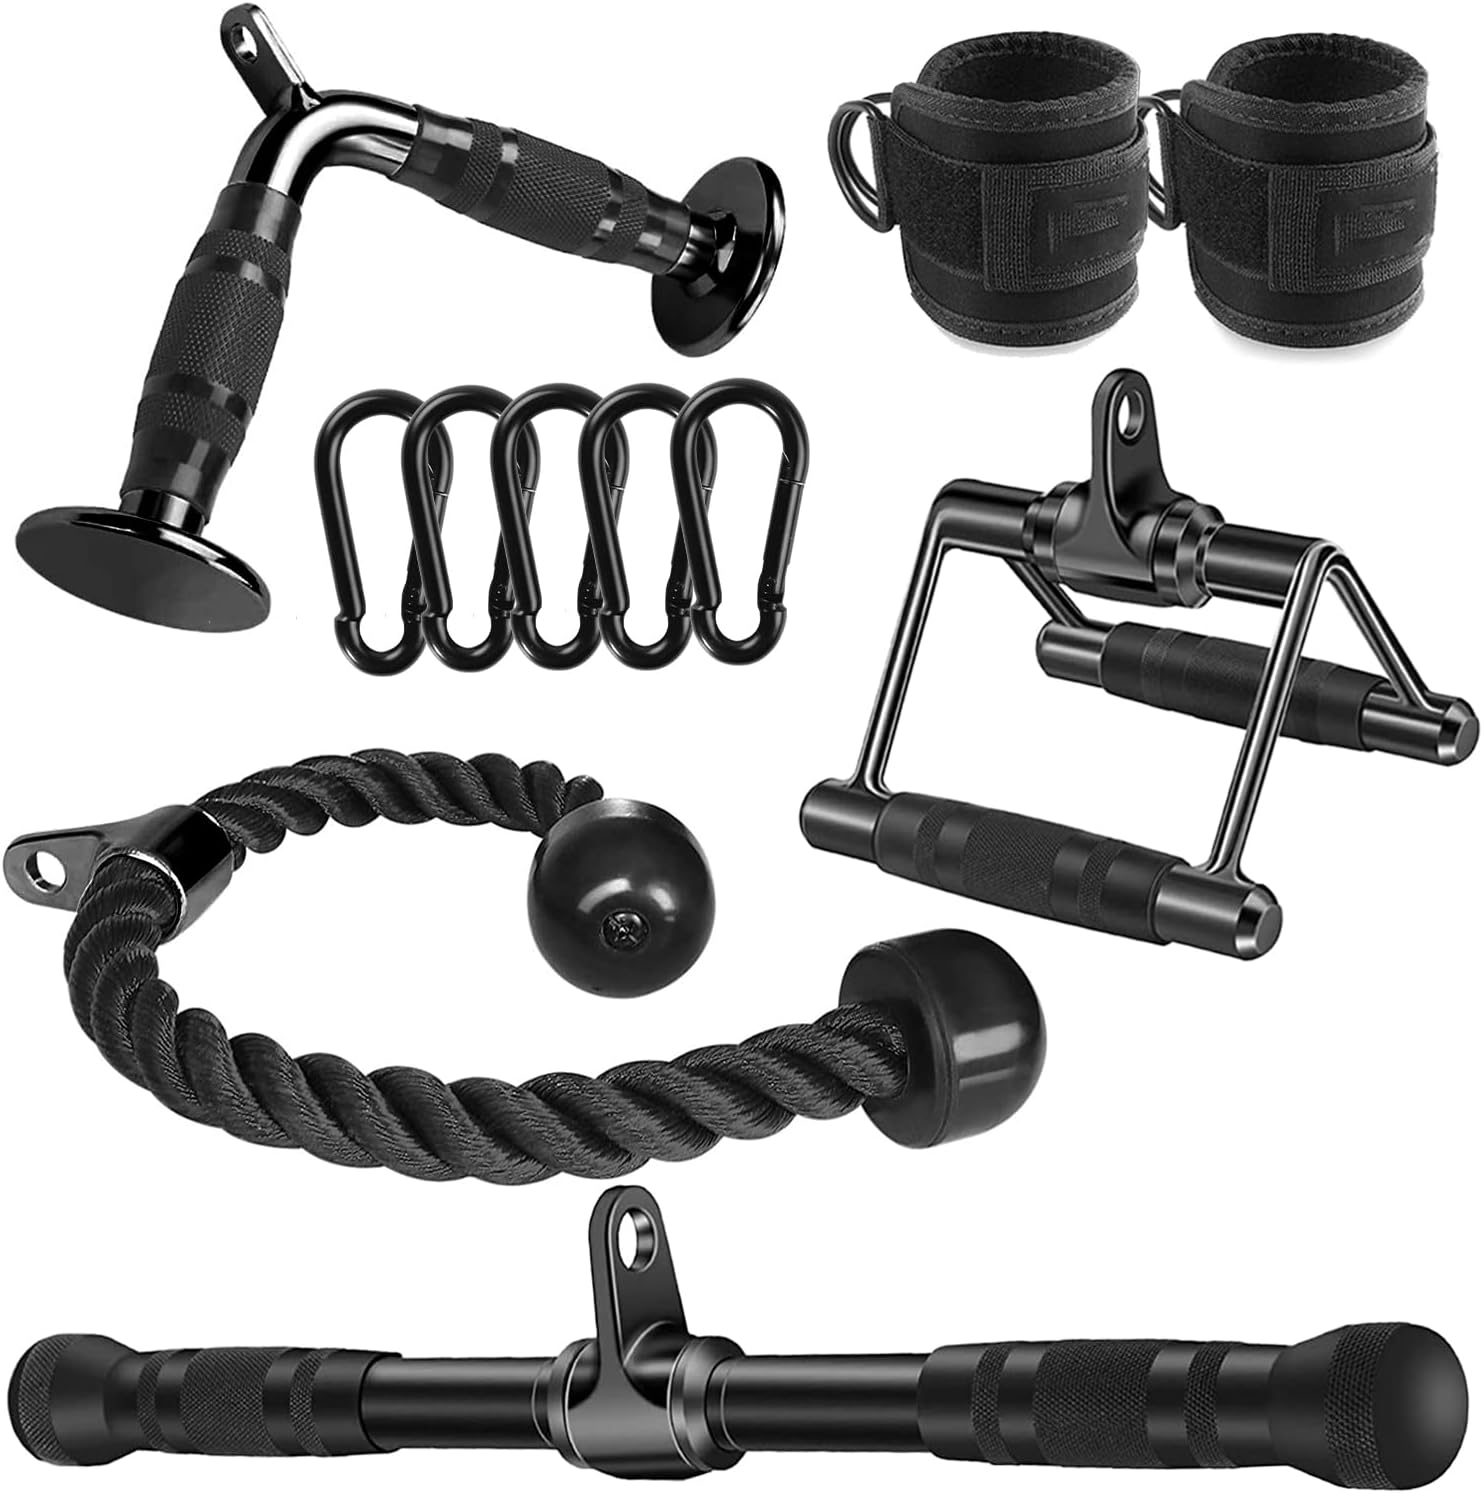 Cable Machine Accessories for Home Gym - Triceps Pull Down and More